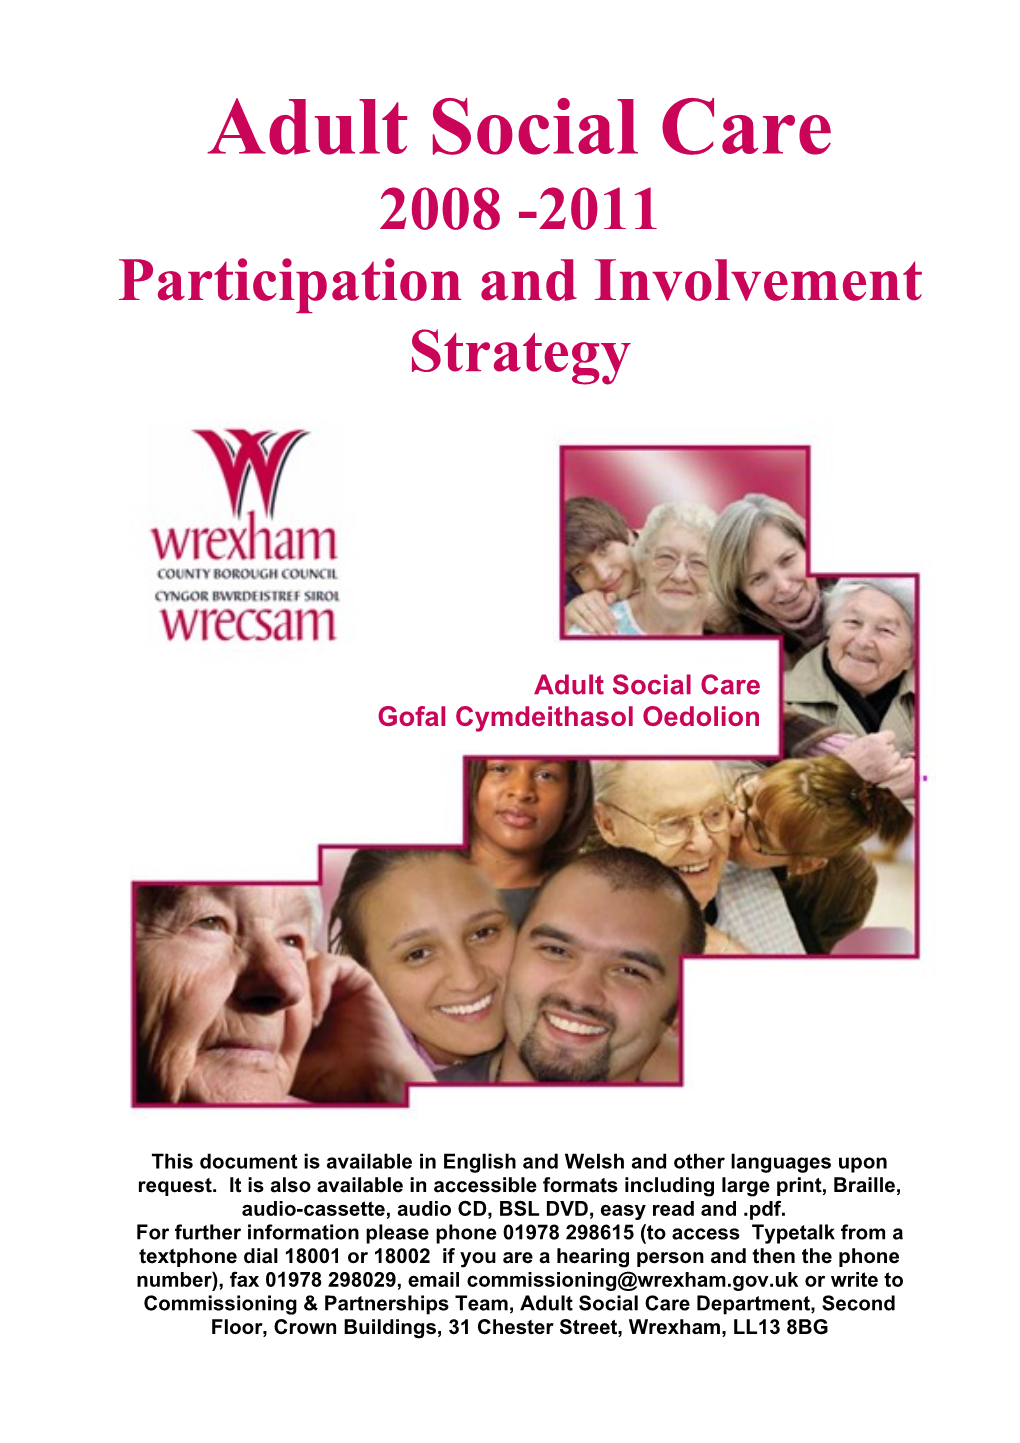 Adult Social Care 2008-2011 Participation and Involvement Strategy